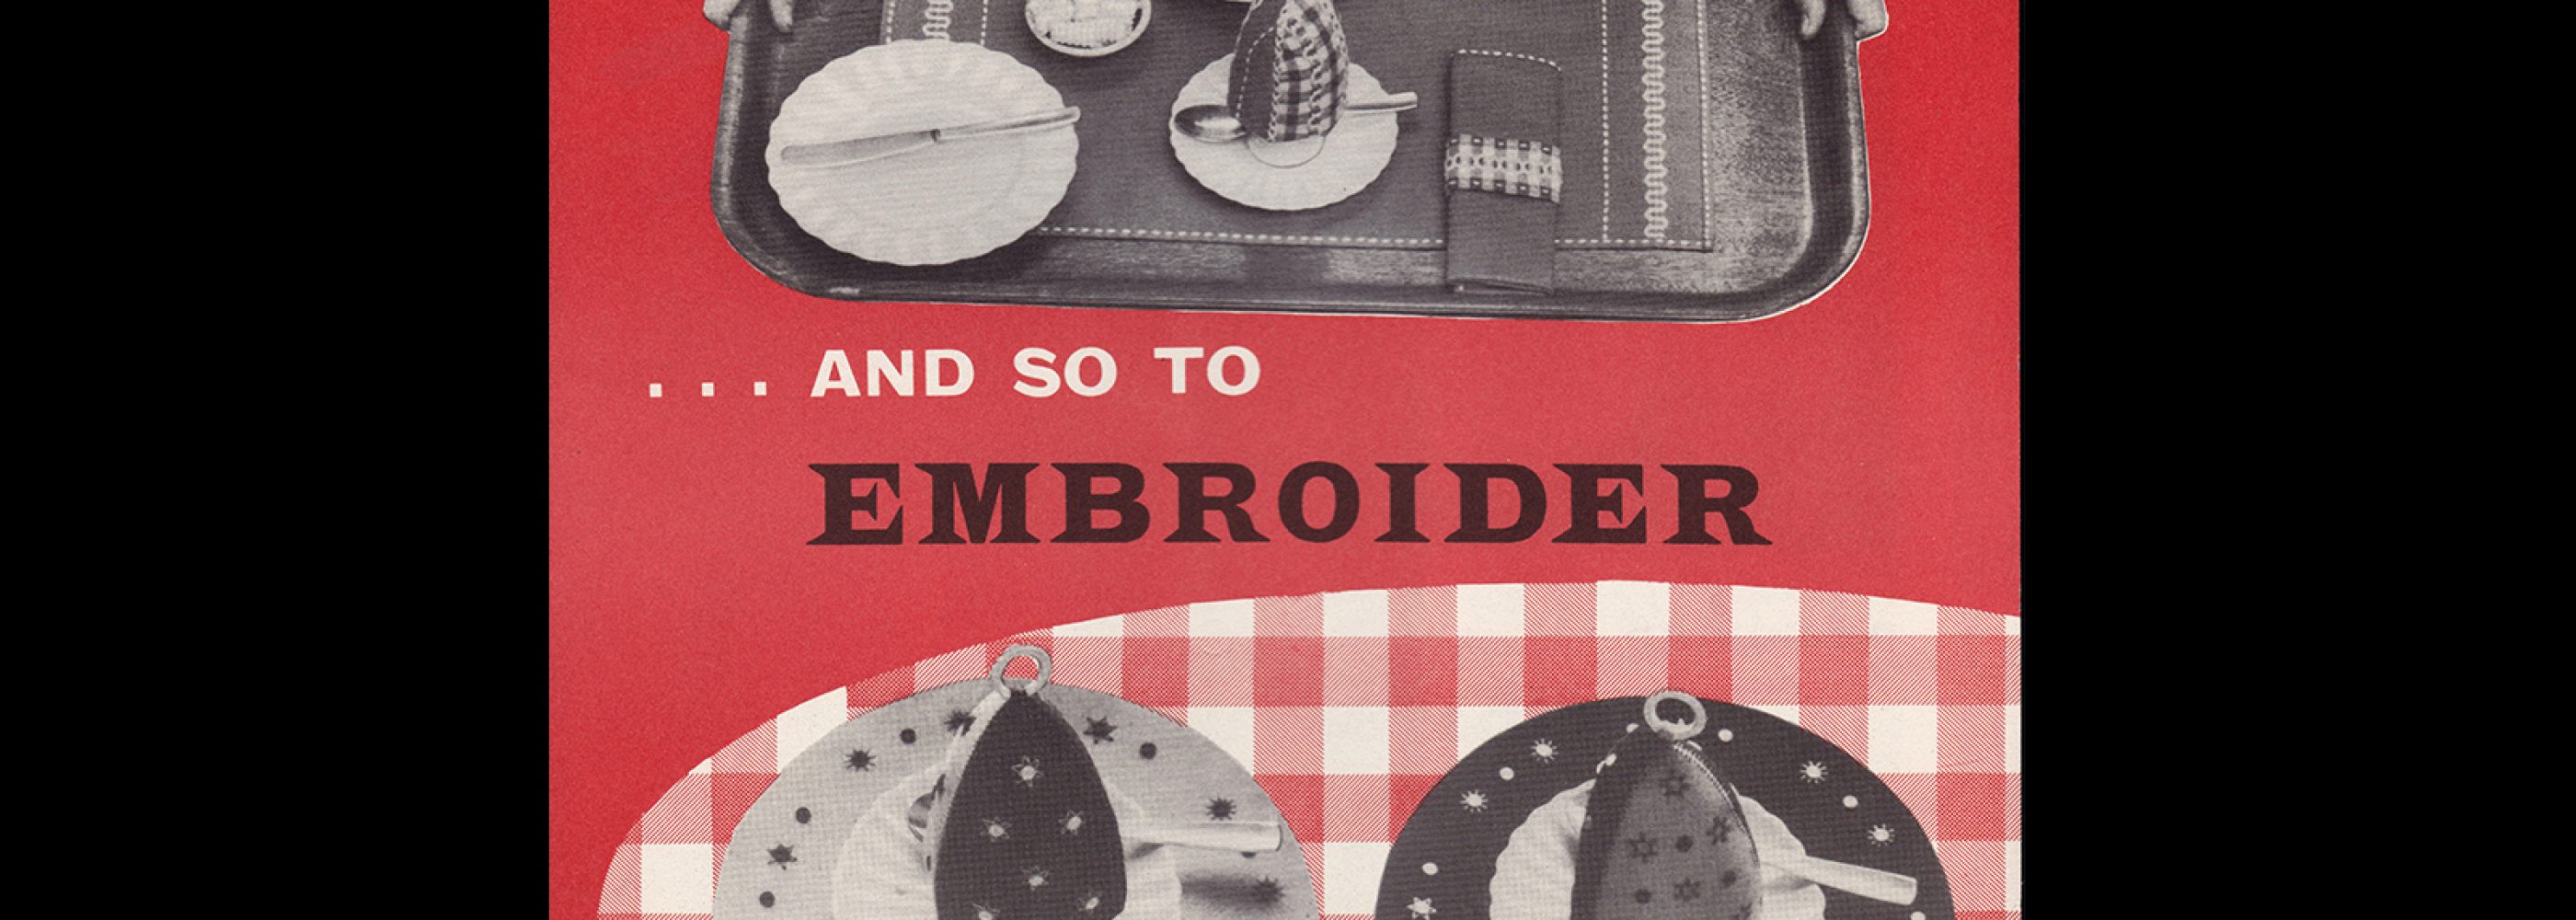 And So To Embroider Bulletin 22b, 1950s